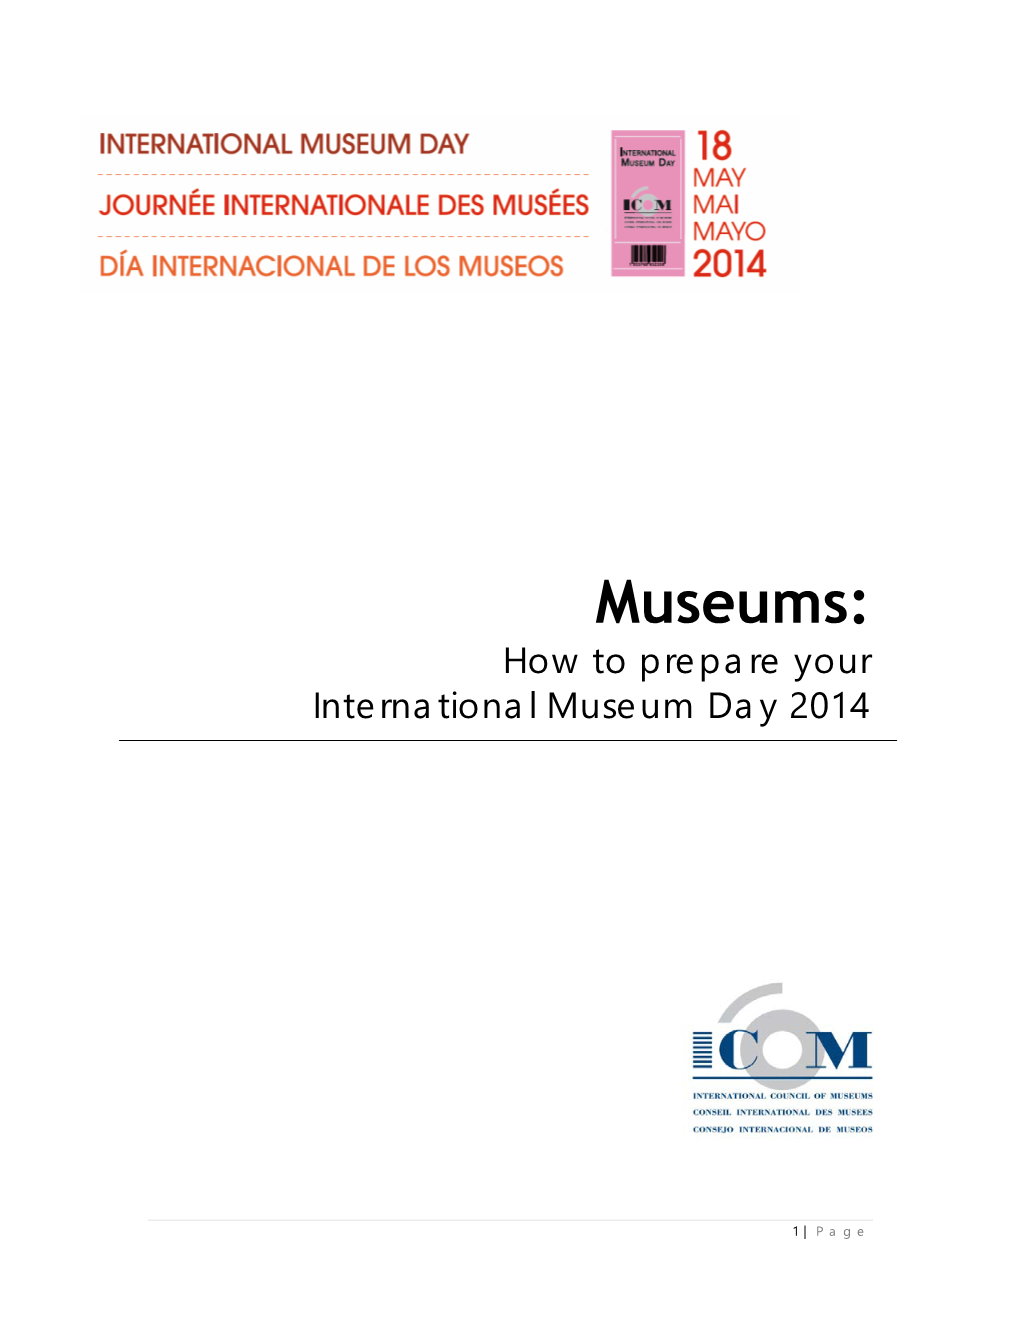 Museums: How to Prepare Your International Museum Day 2014